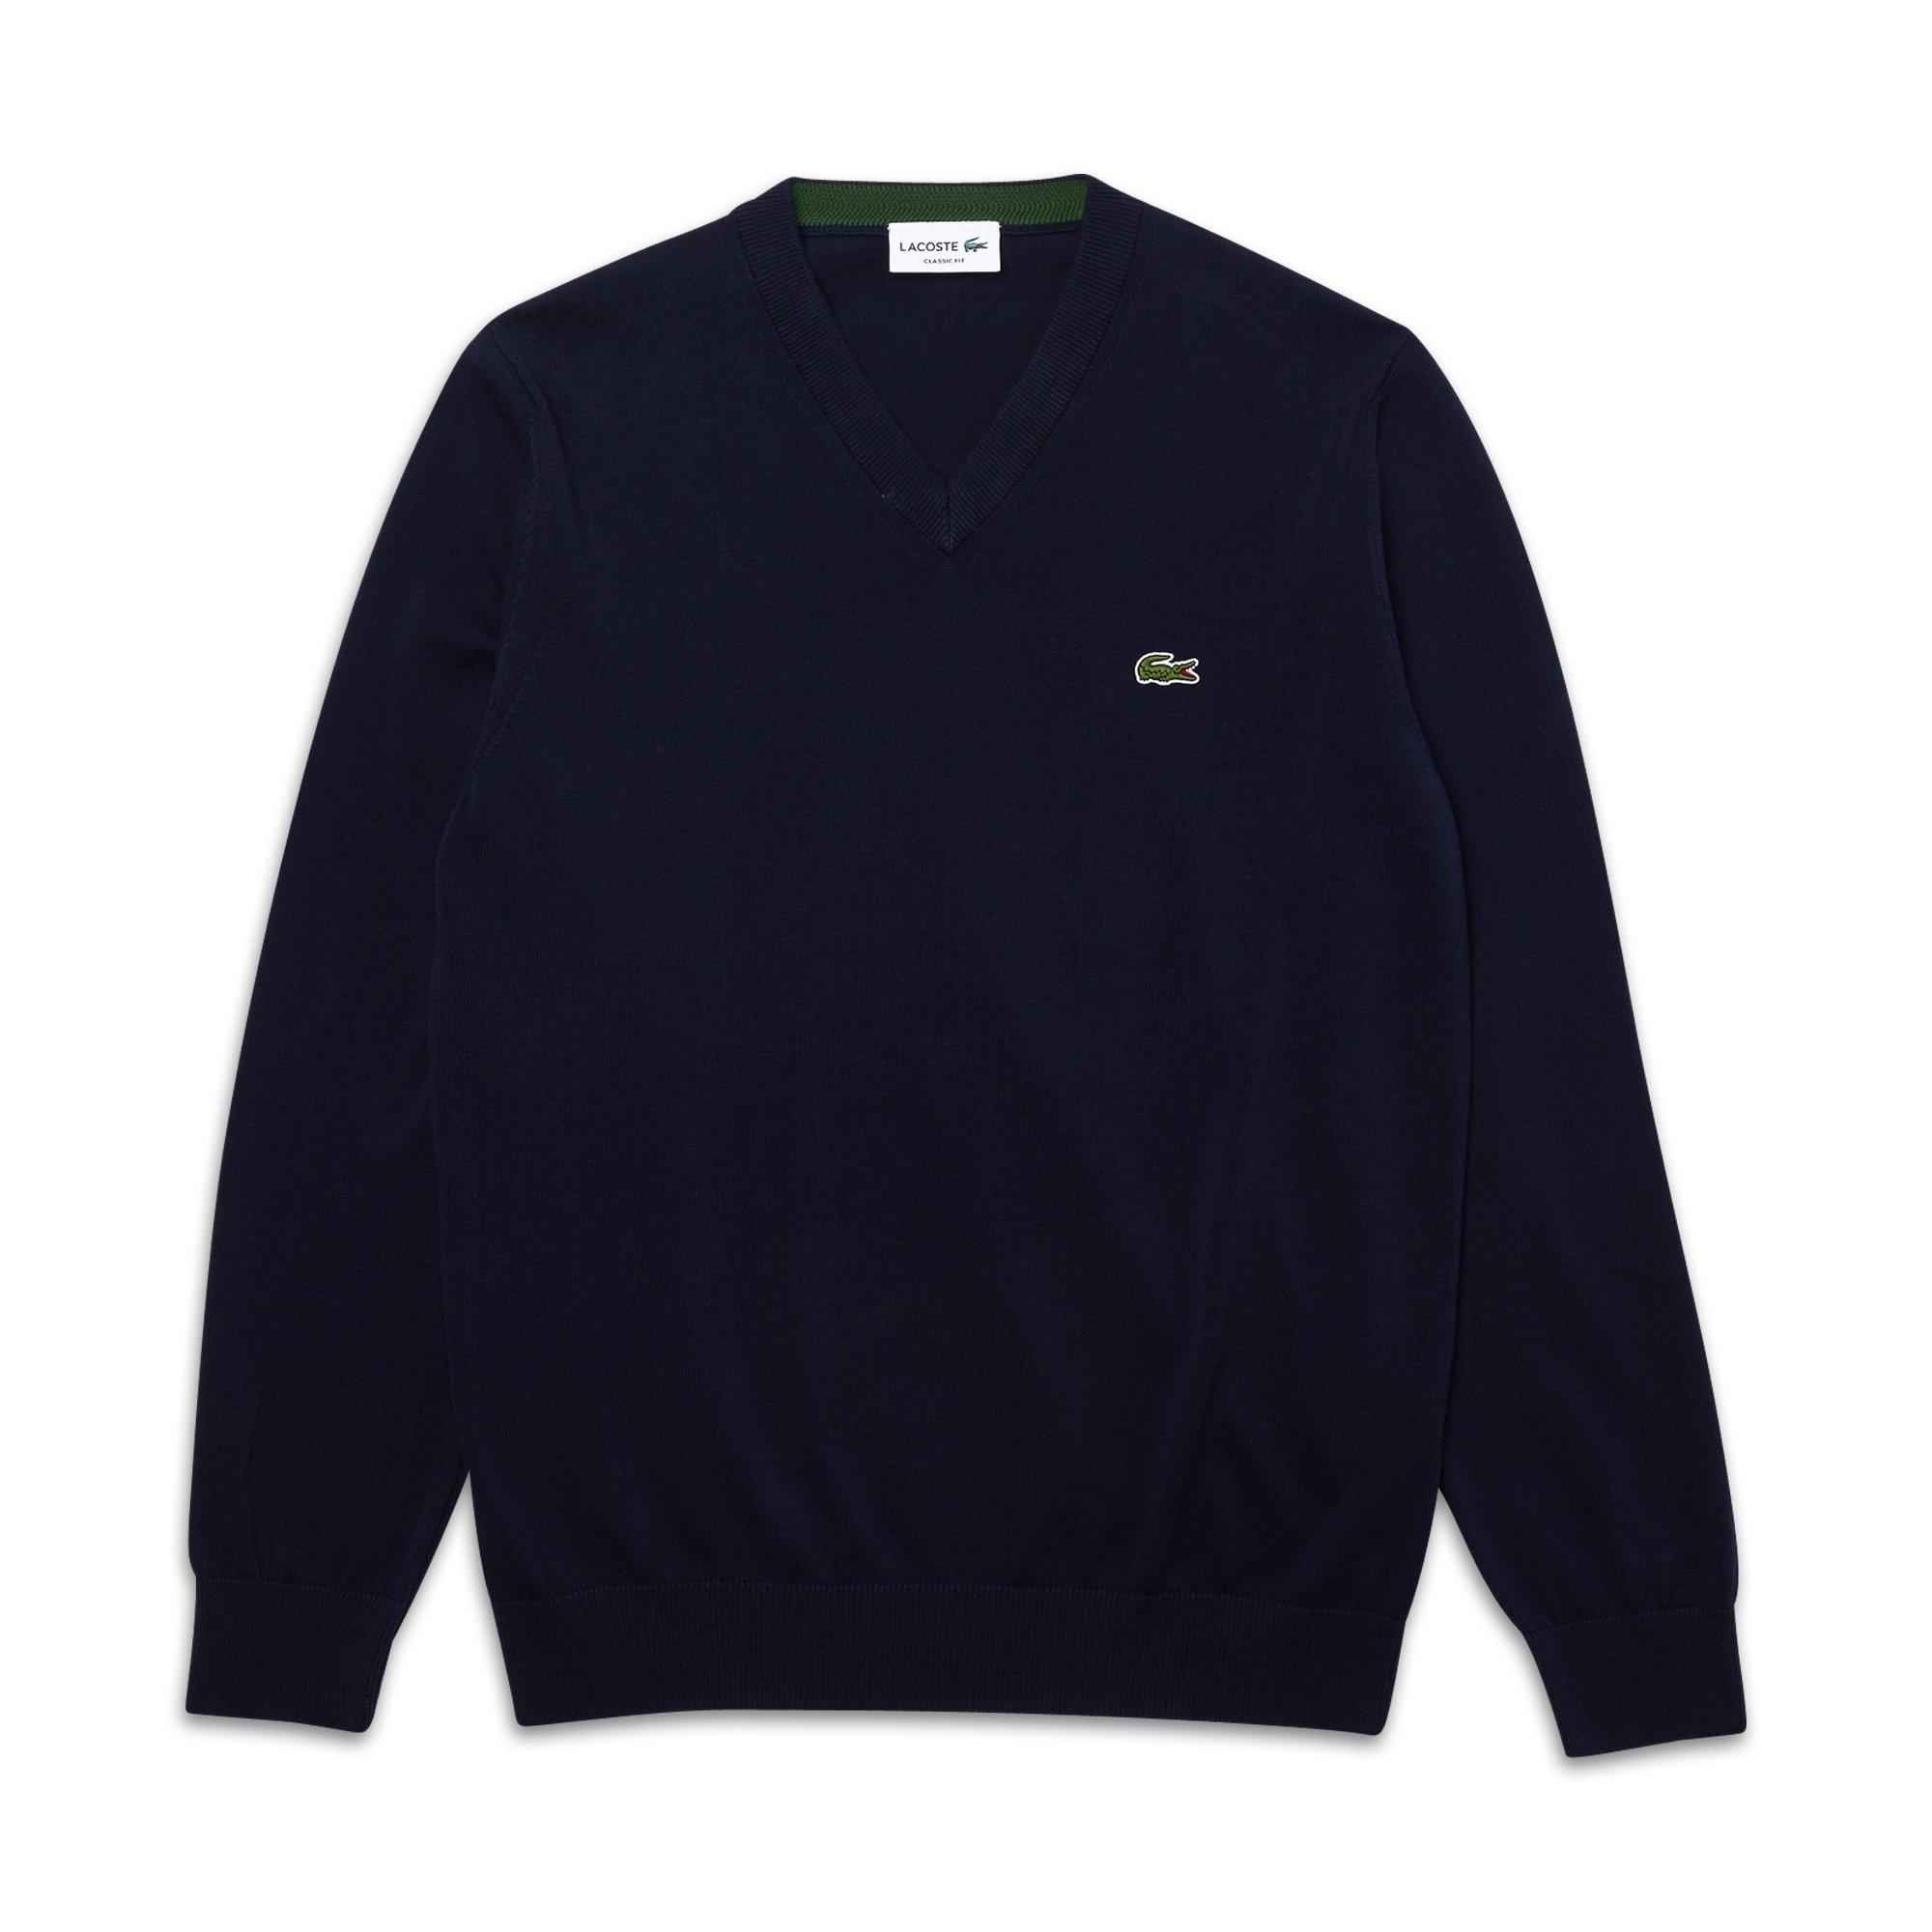 LACOSTE AH1951 Pullover 